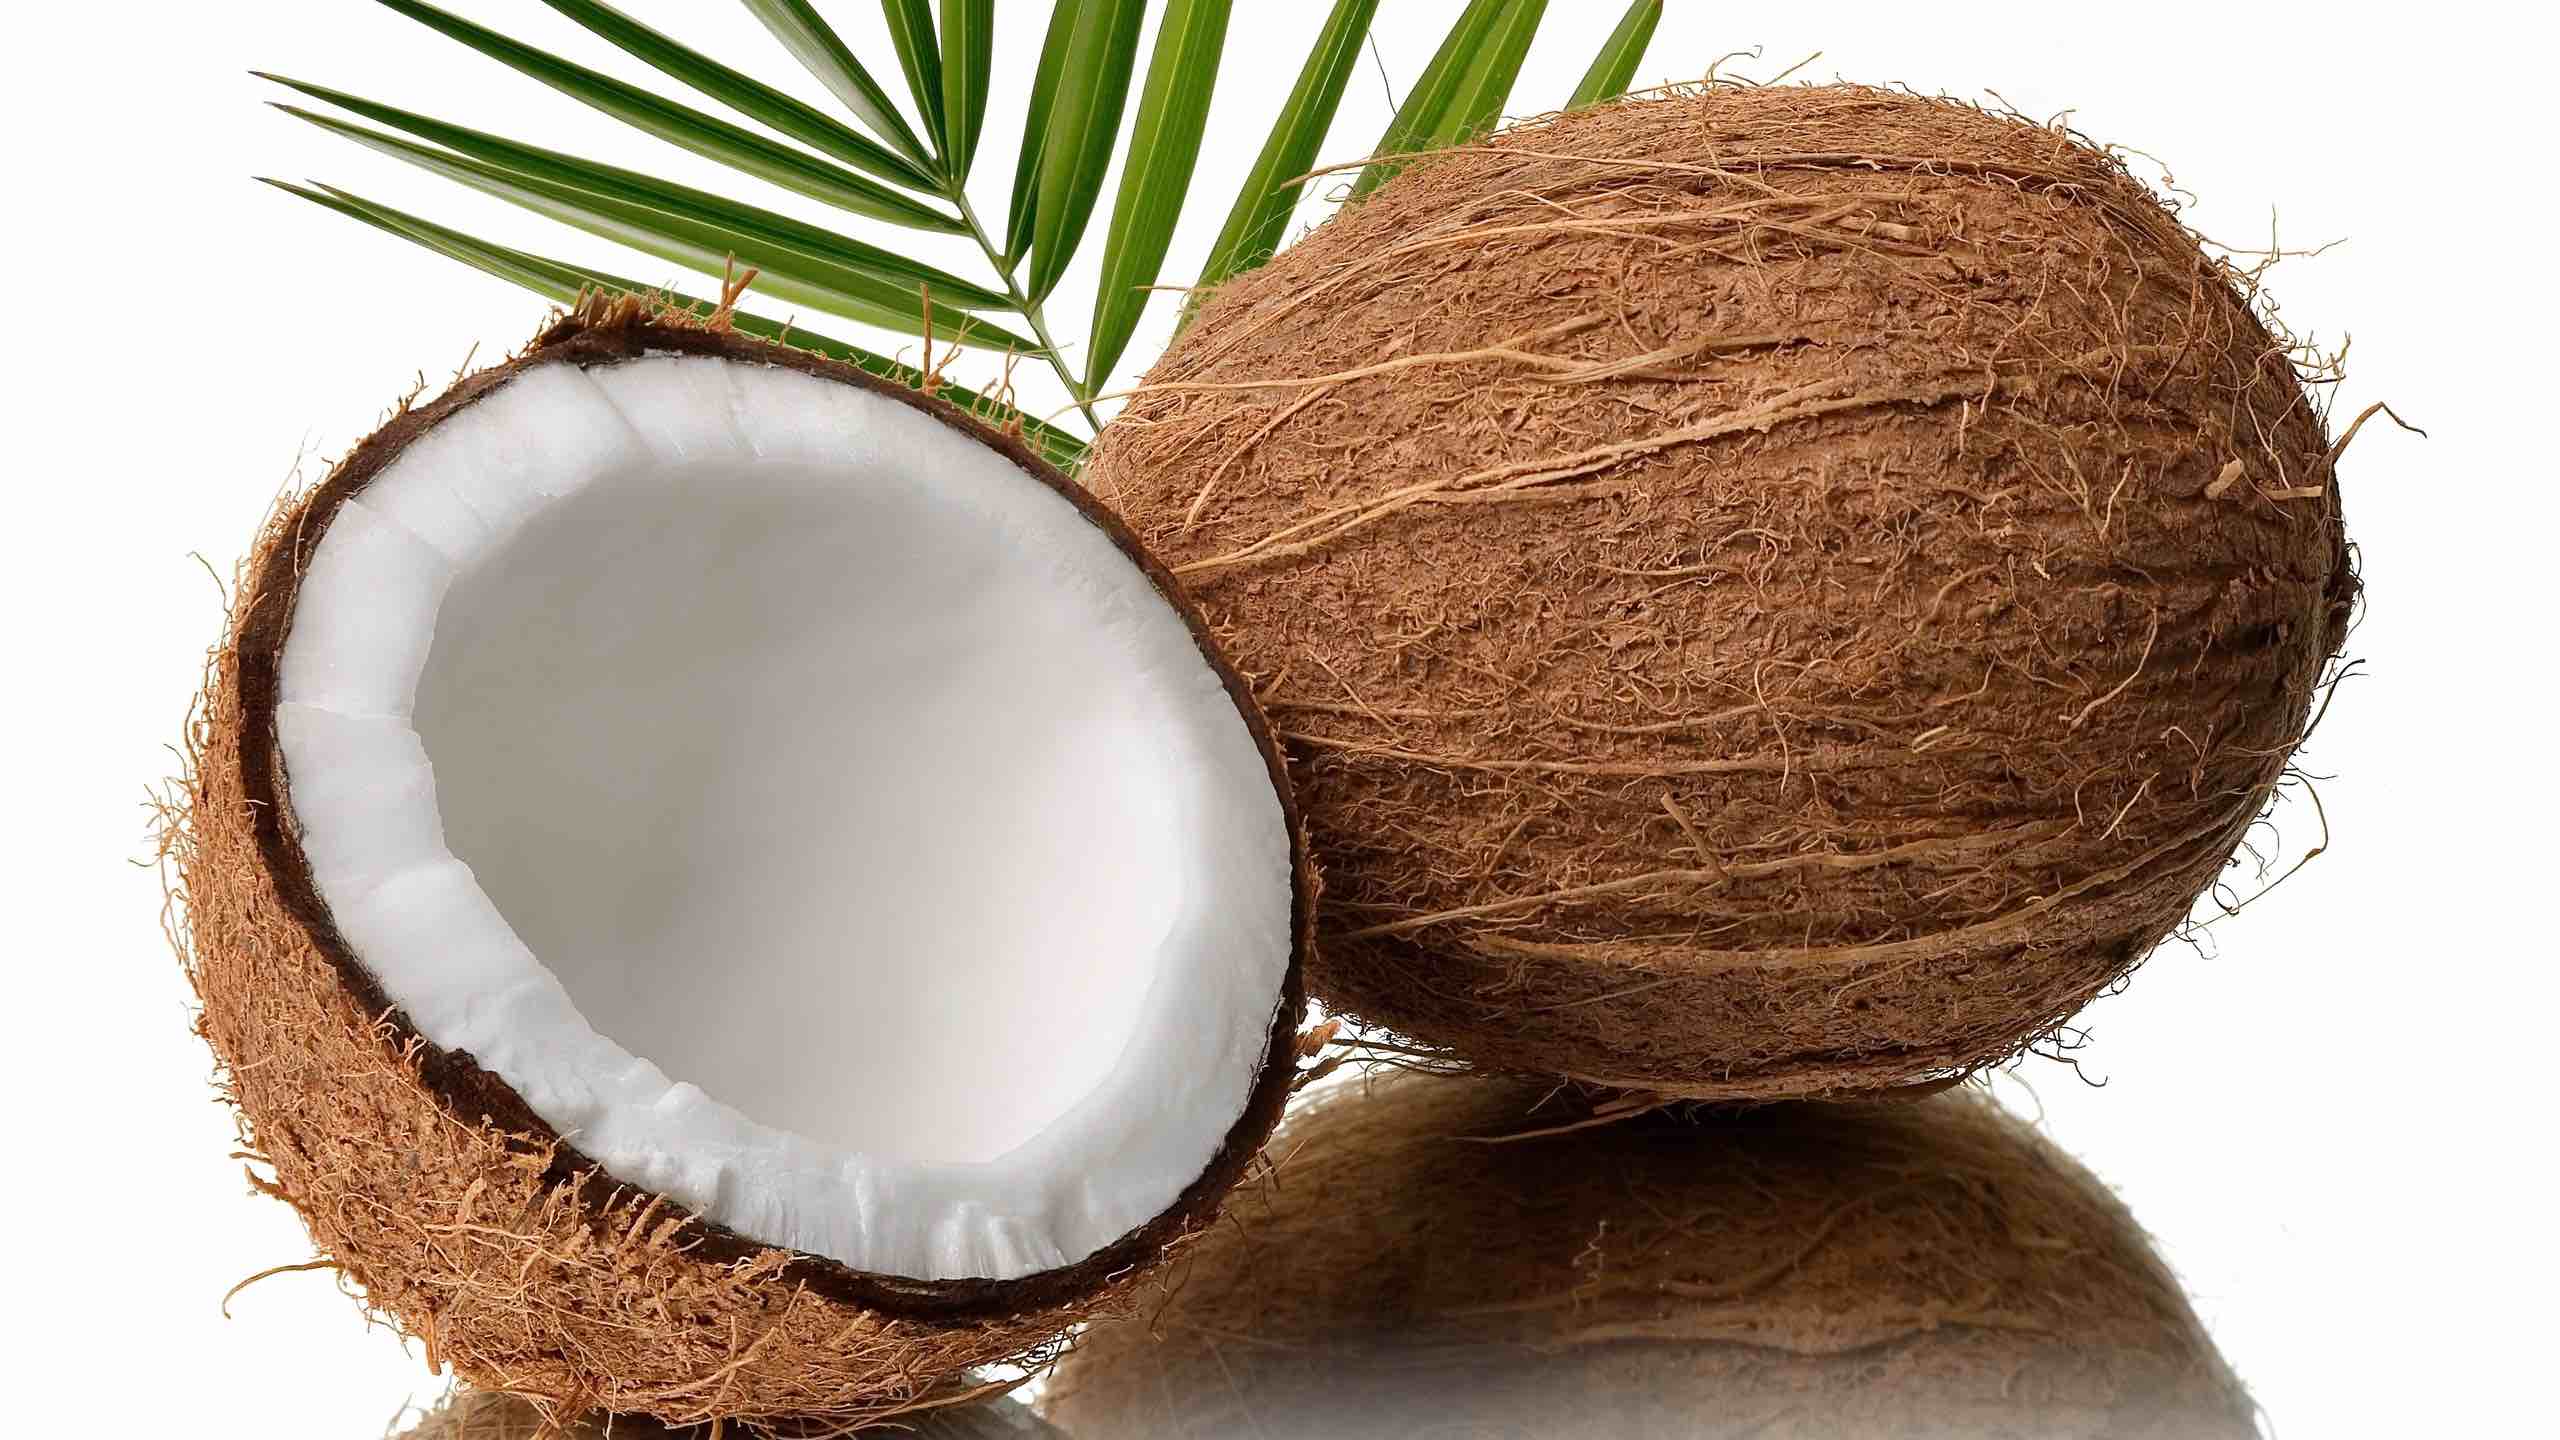 Coconut, Export, GEPA, Desiccated, Ghana, Cocoa Post,